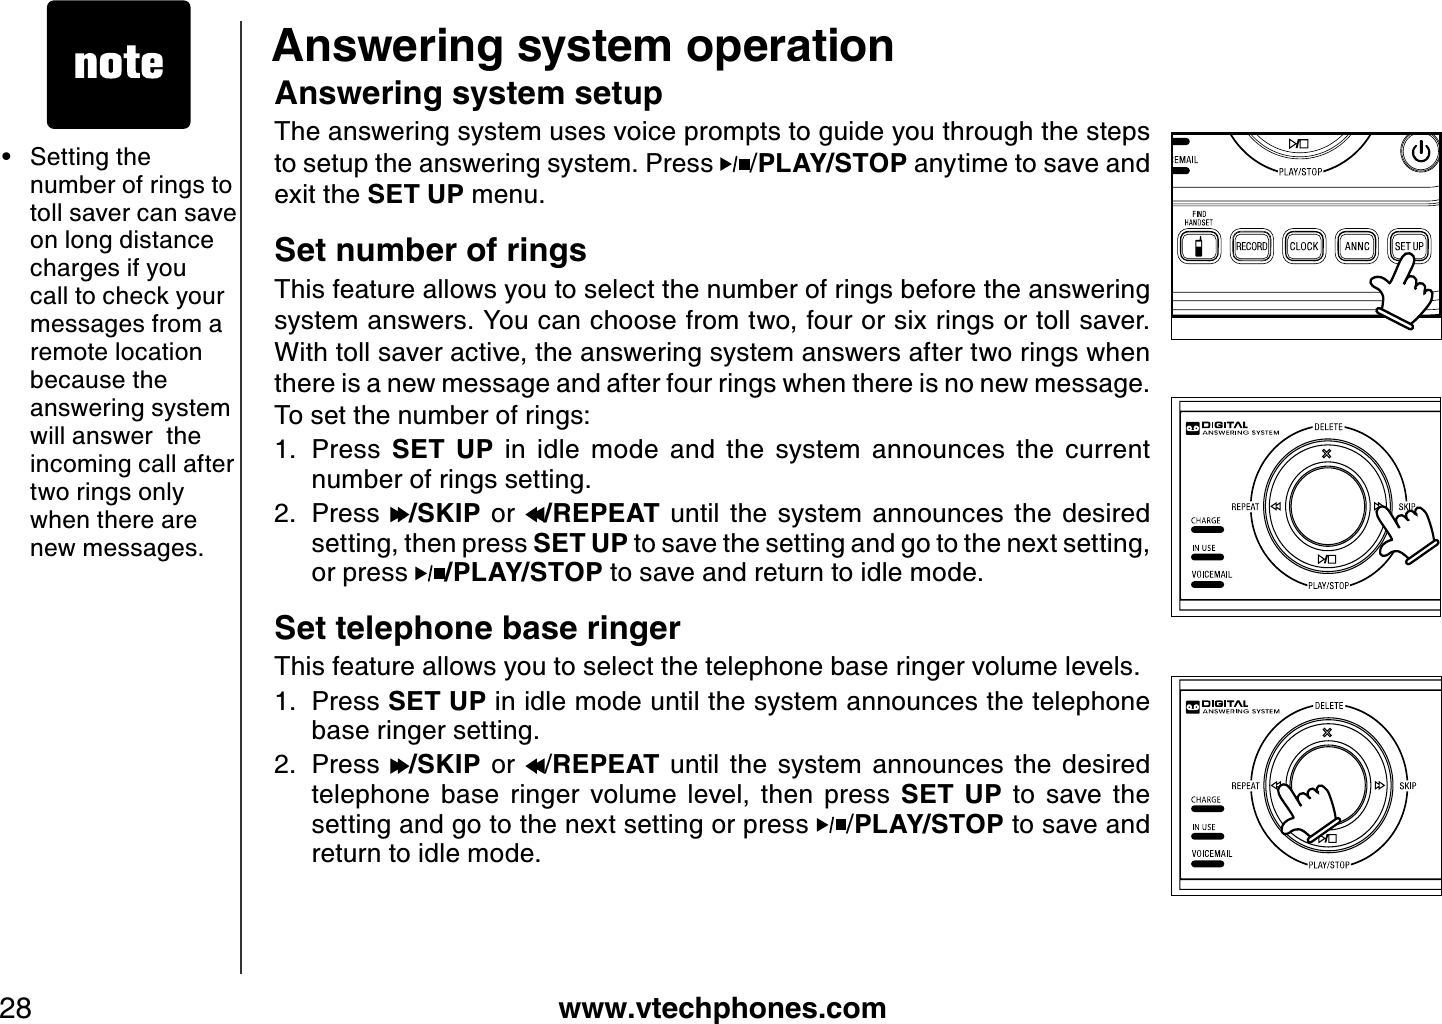 www.vtechphones.com28Answering system operationAnswering system setupThe answering system uses voice prompts to guide you through the steps to setup the answering system. Press  /PLAY/STOP anytime to save and exit the SET UP menu.Set number of ringsThis feature allows you to select the number of rings before the answering system answers. You can choose from two, four or six rings or toll saver. With toll saver active, the answering system answers after two rings when there is a new message and after four rings when there is no new message. To set the number of rings:Press  SET  UP  in  idle  mode  and  the  system  announces  the  current number of rings setting.Press  /SKIP  or  /REPEAT  until  the  system  announces  the  desired setting, then press SET UP to save the setting and go to the next setting,  or press  /PLAY/STOP to save and return to idle mode.Set telephone base ringerThis feature allows you to select the telephone base ringer volume levels.  Press SET UP in idle mode until the system announces the telephone base ringer setting.Press  /SKIP  or  /REPEAT  until  the  system  announces  the  desired telephone  base  ringer  volume  level,  then  press  SET  UP  to  save  the setting and go to the next setting or press  /PLAY/STOP to save and return to idle mode.1.2.1.2.• Setting the number of rings to toll saver can save on long distance charges if you call to check your messages from a remote location because the answering system will answer  the incoming call after two rings only when there are new messages. 